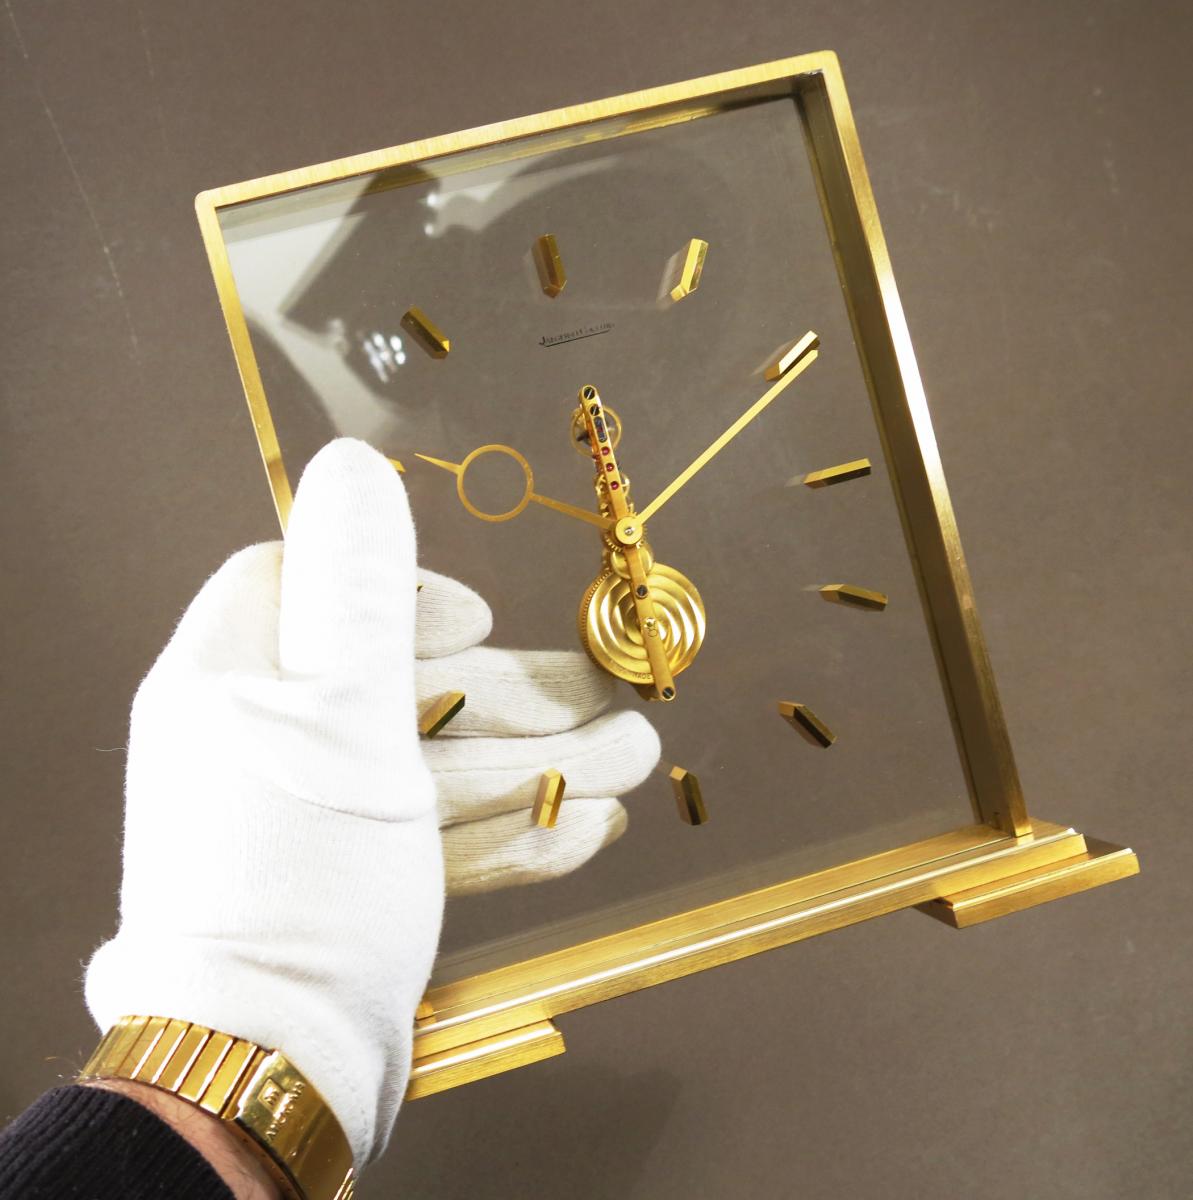 Midcentury Clocks For Your Home: Jaeger LeCoultre